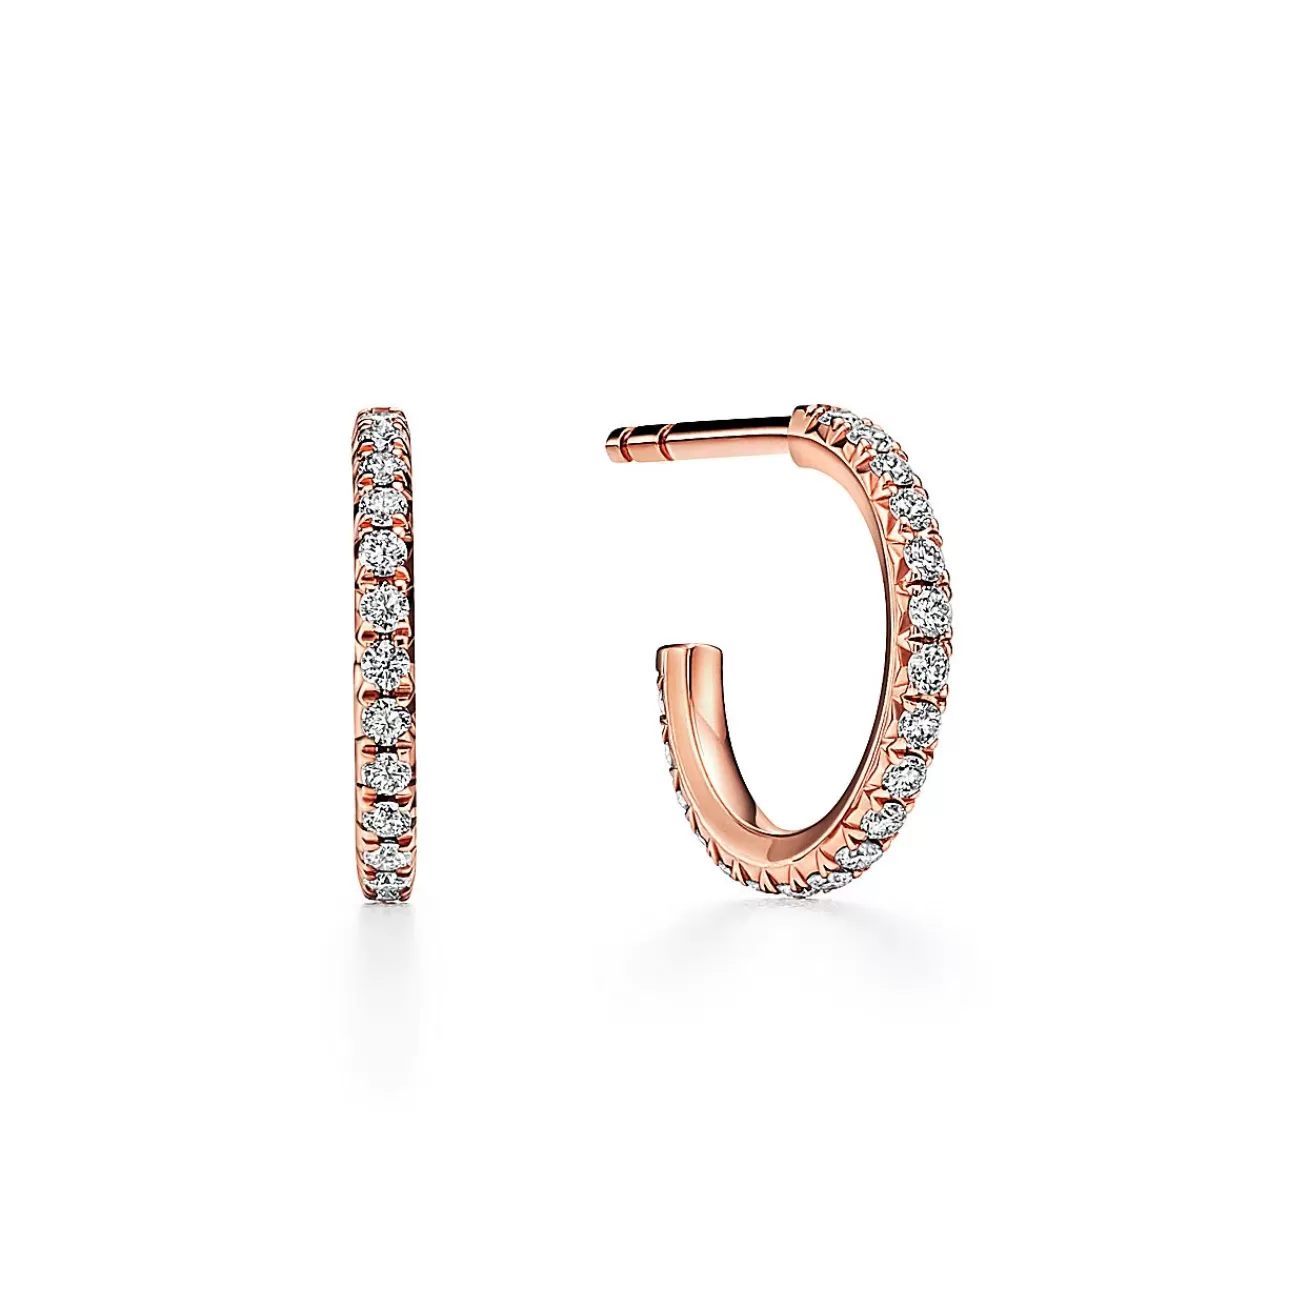 Tiffany & Co. Tiffany Metro Hoop Earrings in Rose Gold with Diamonds, Small | ^ Earrings | Gifts for Her